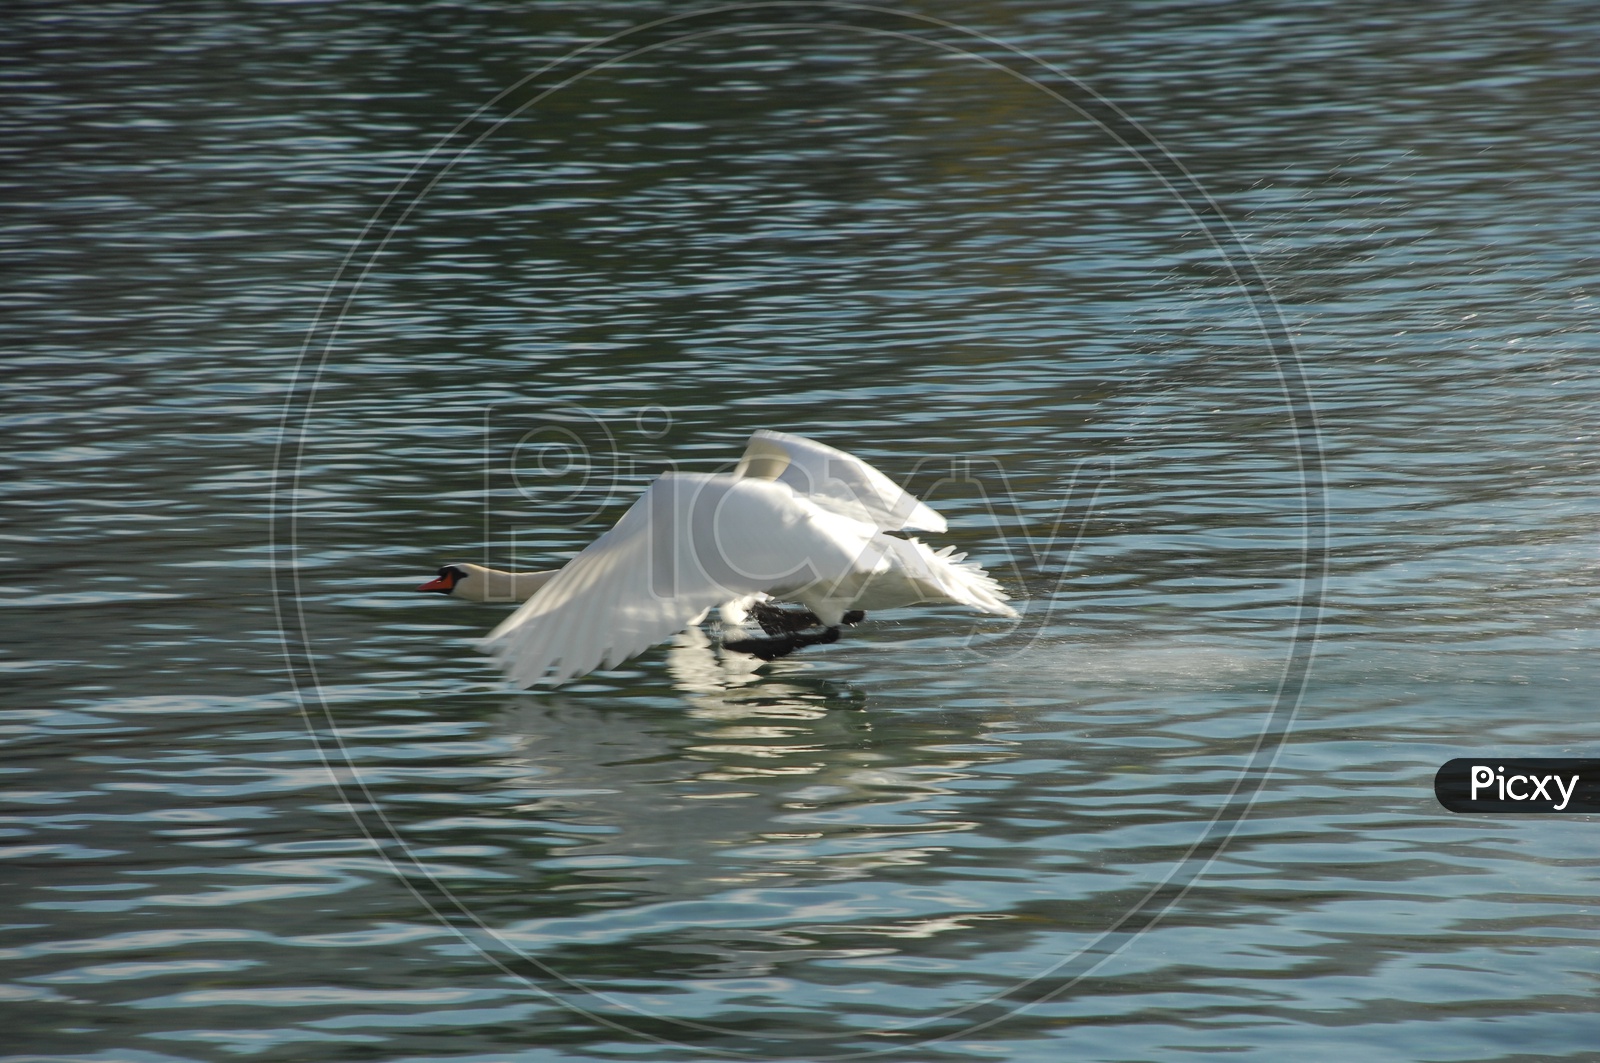 A Tundra Swan flying from the water